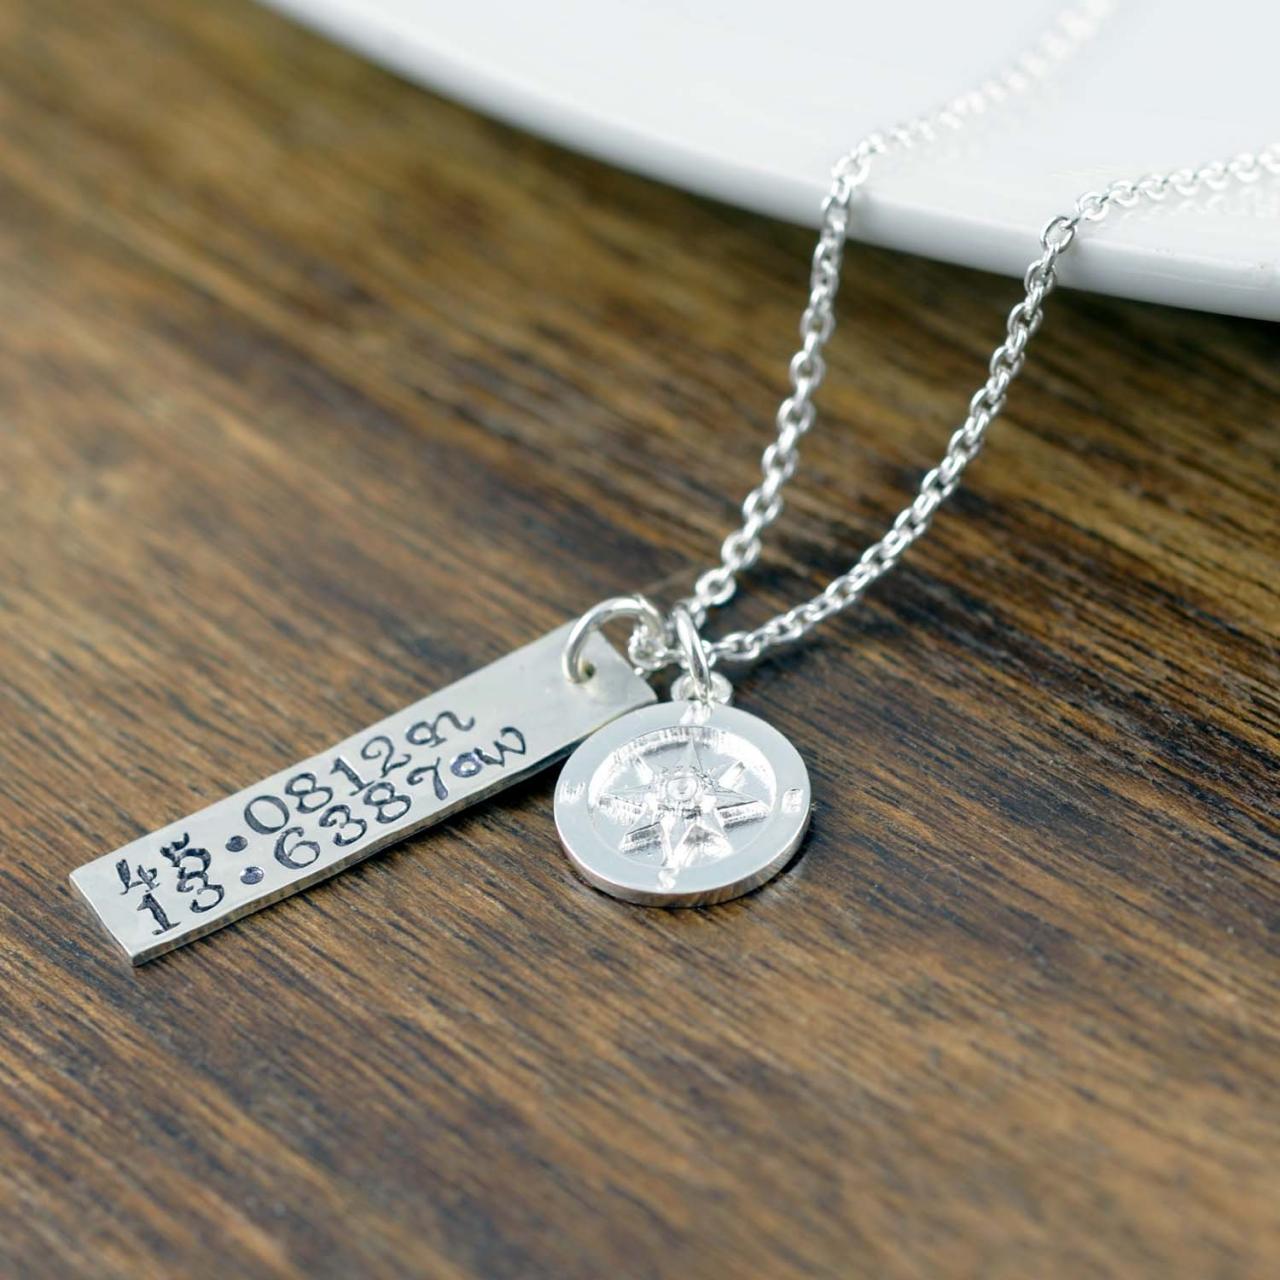 Coordinate Necklace, Latitude Longitude Necklace, Custom Coordinates, Coordinate Jewelry, Hand Stamped Necklace, Sterling Silver Compass